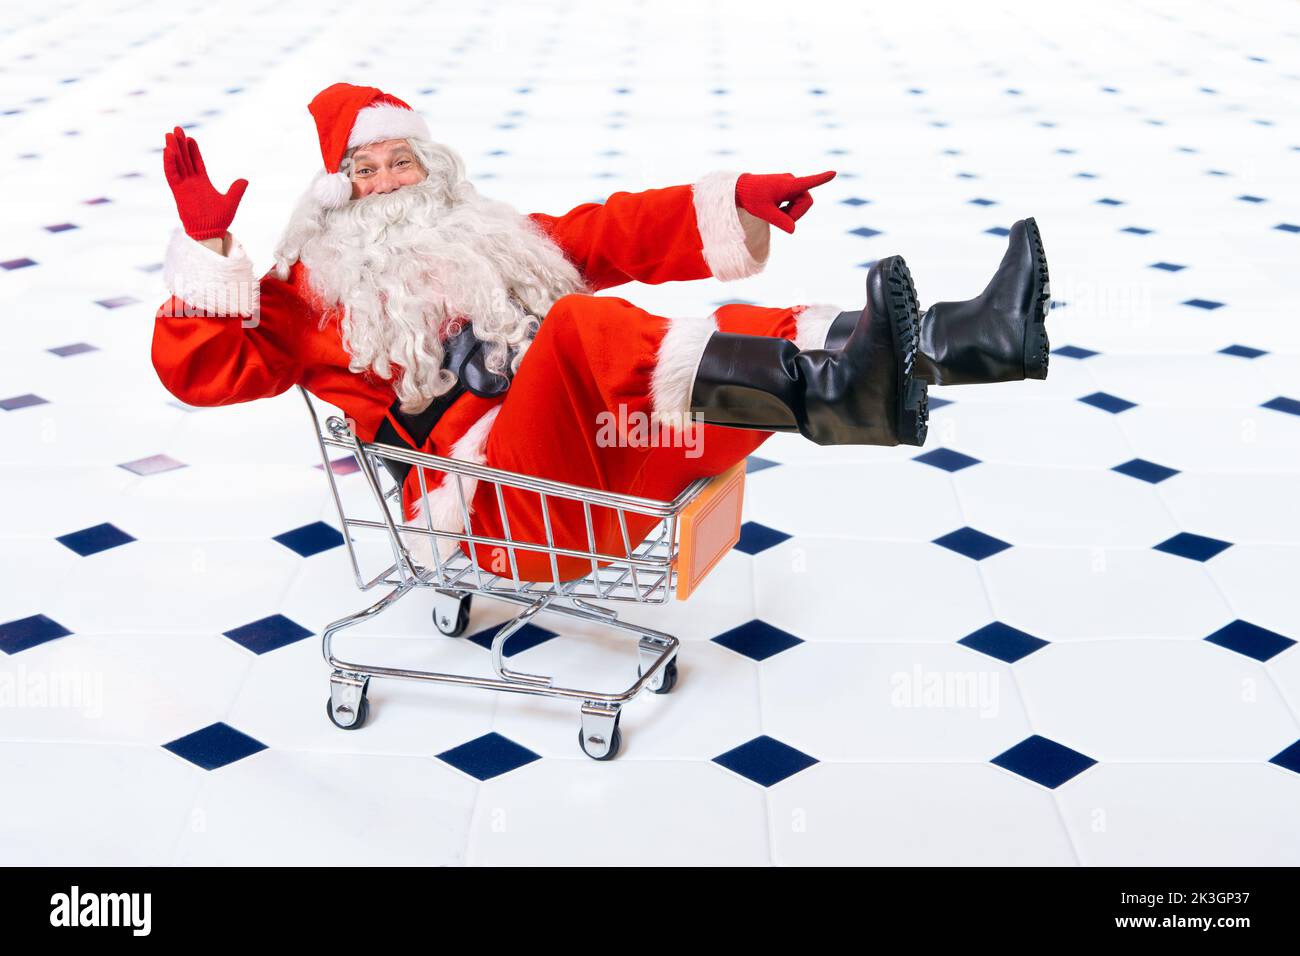 Cheerful Santa Claus sits in a shopping cart and points the direction with his hand Stock Photo